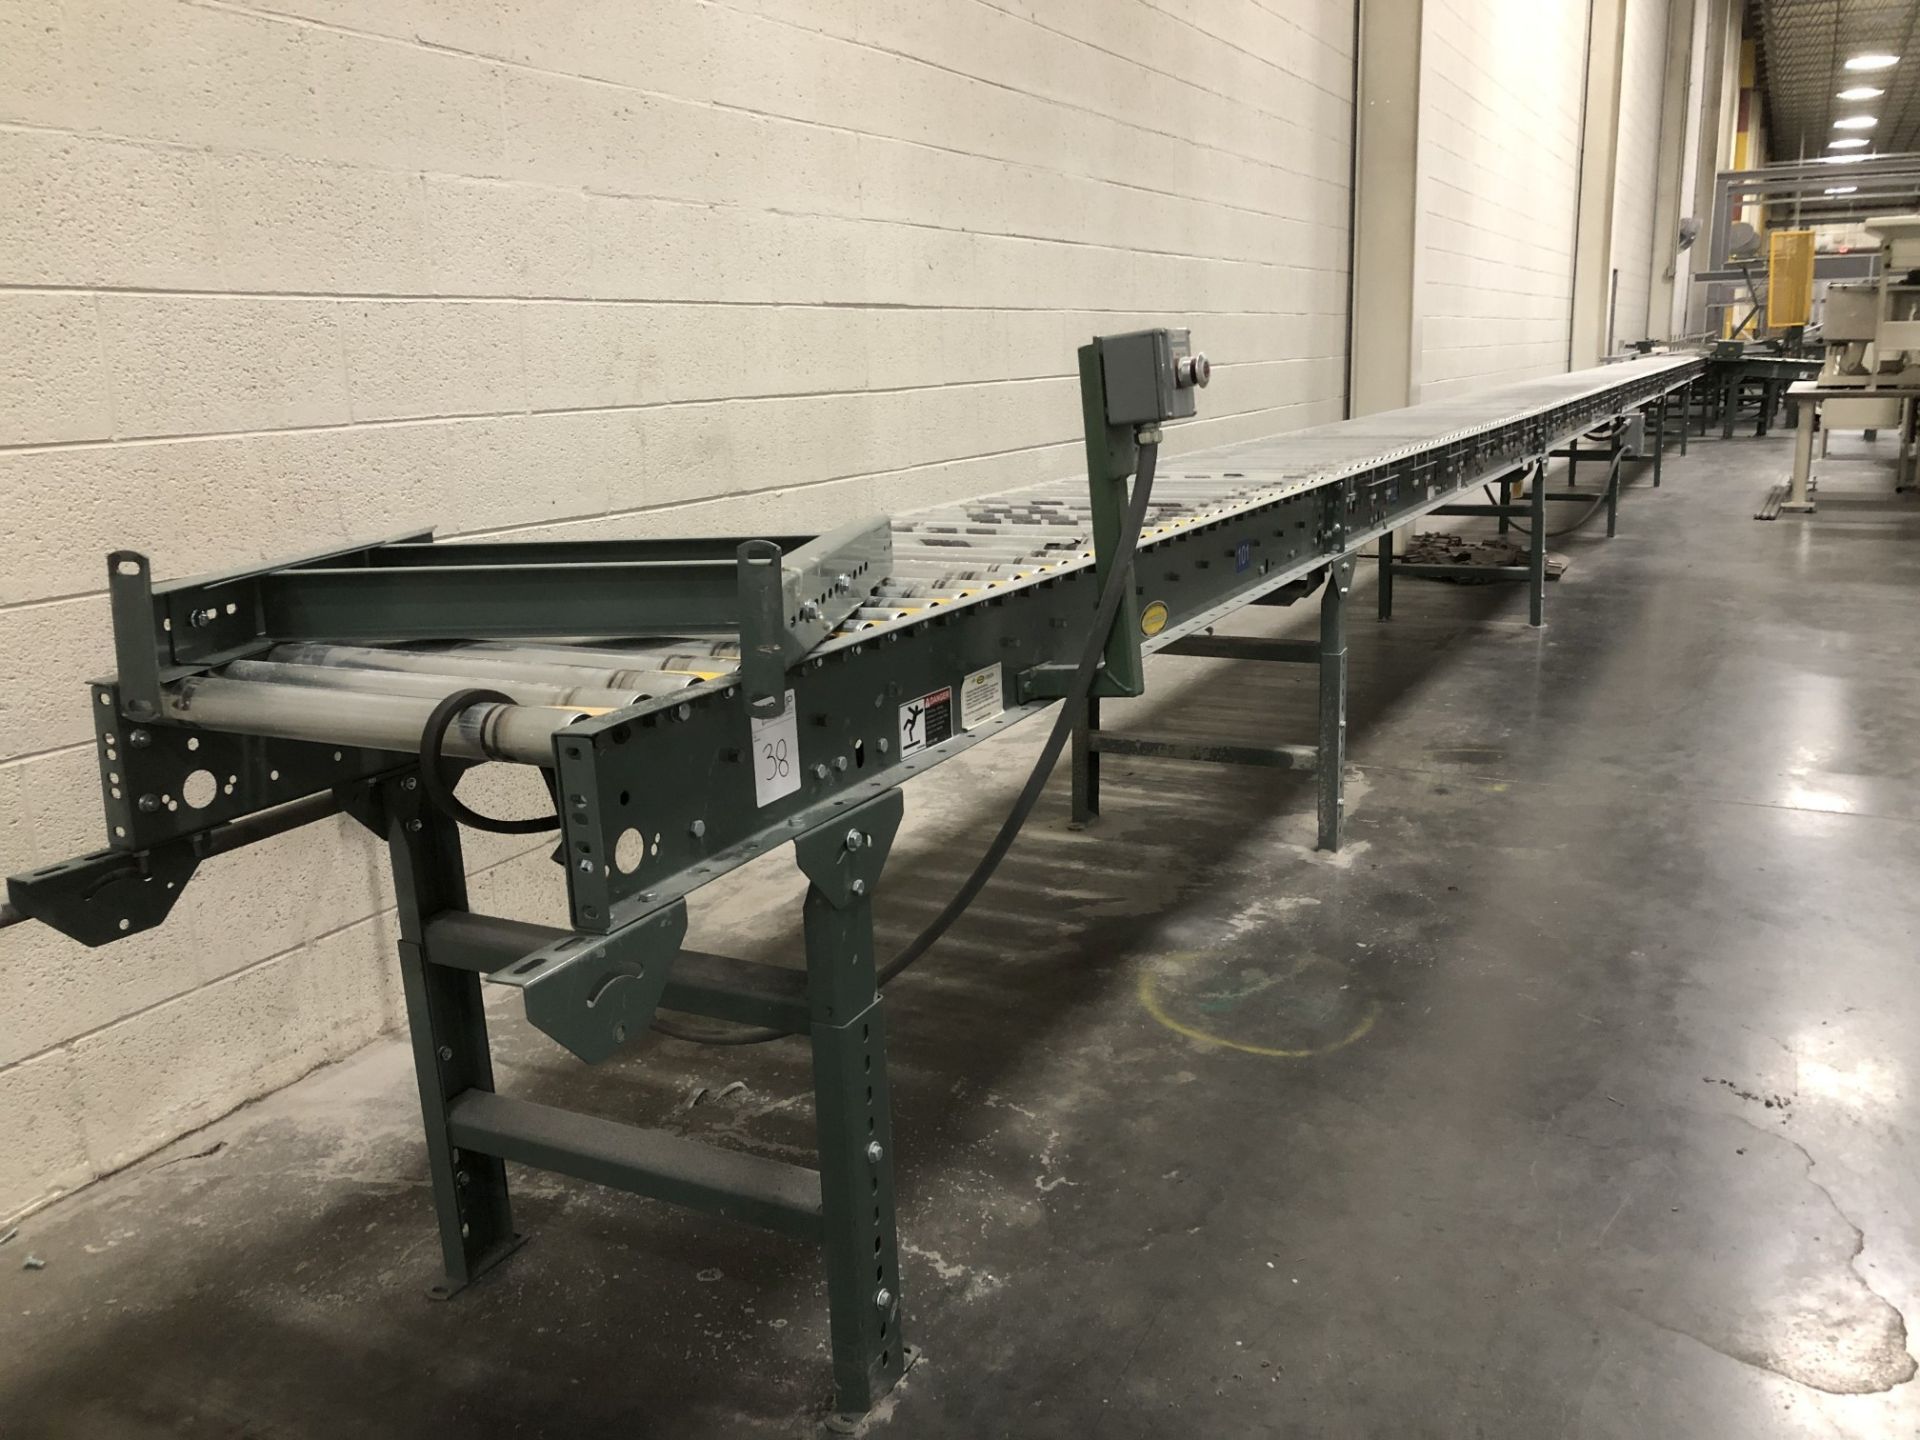 All Hytrol Conveyor Throughout Entire Site, Mostly 20" Wide Powered Roller Conveyor [Please - Image 42 of 80